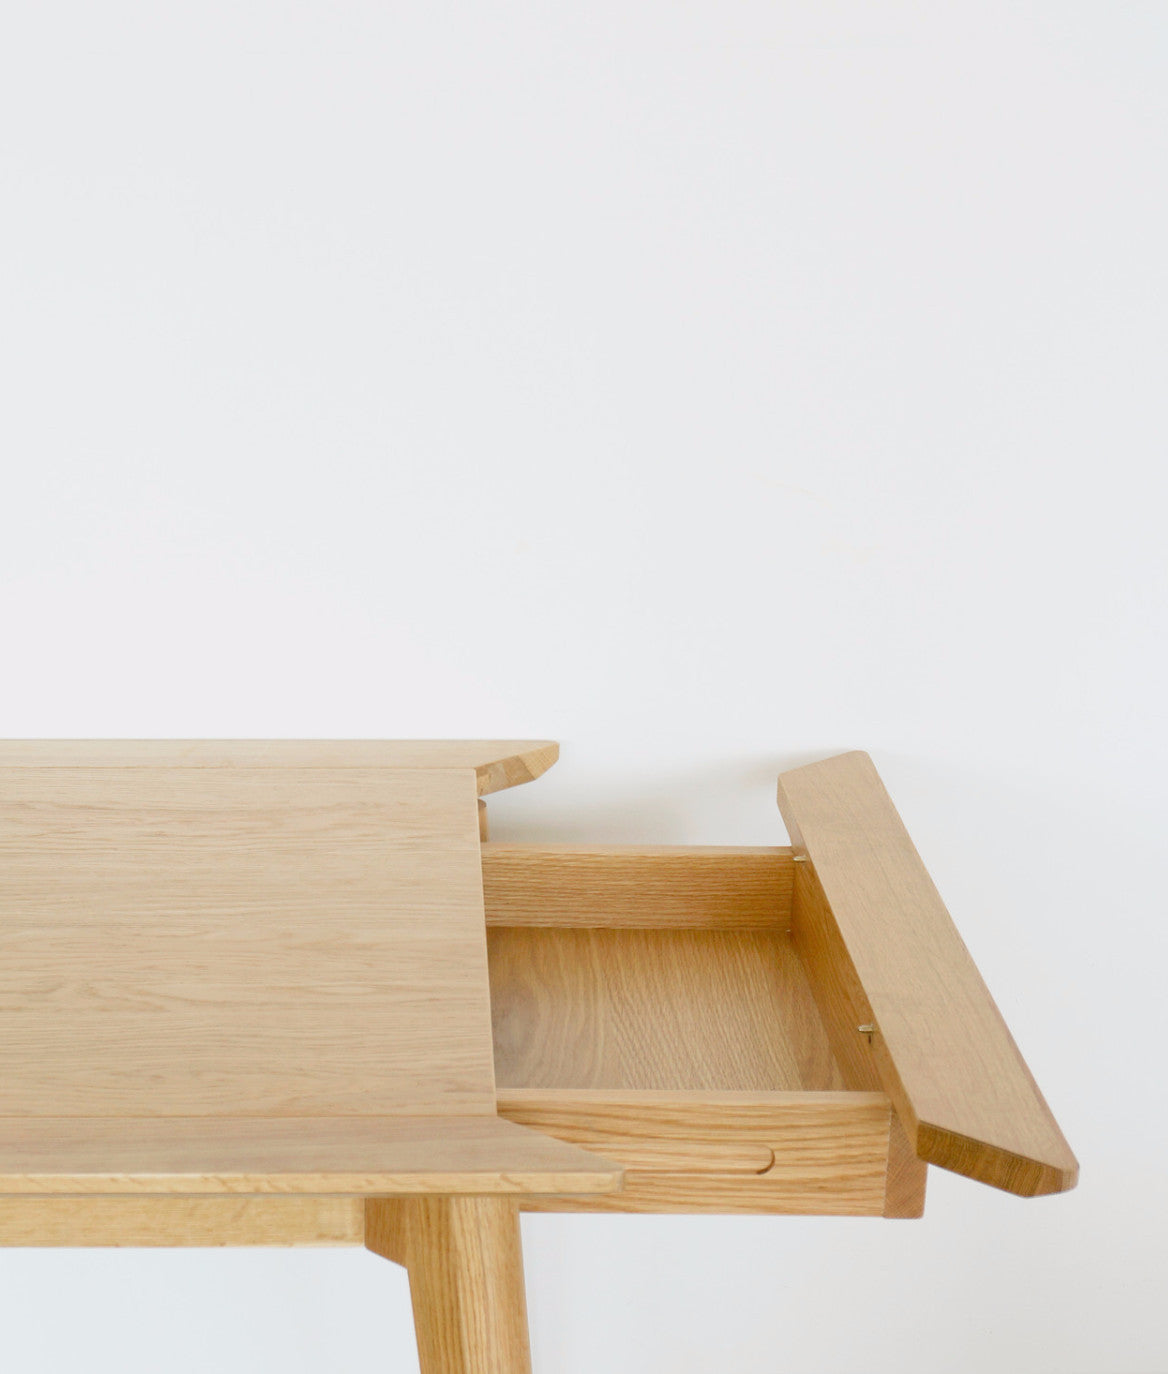 SIMPLE TABLE Table ziinlife Natural Oak